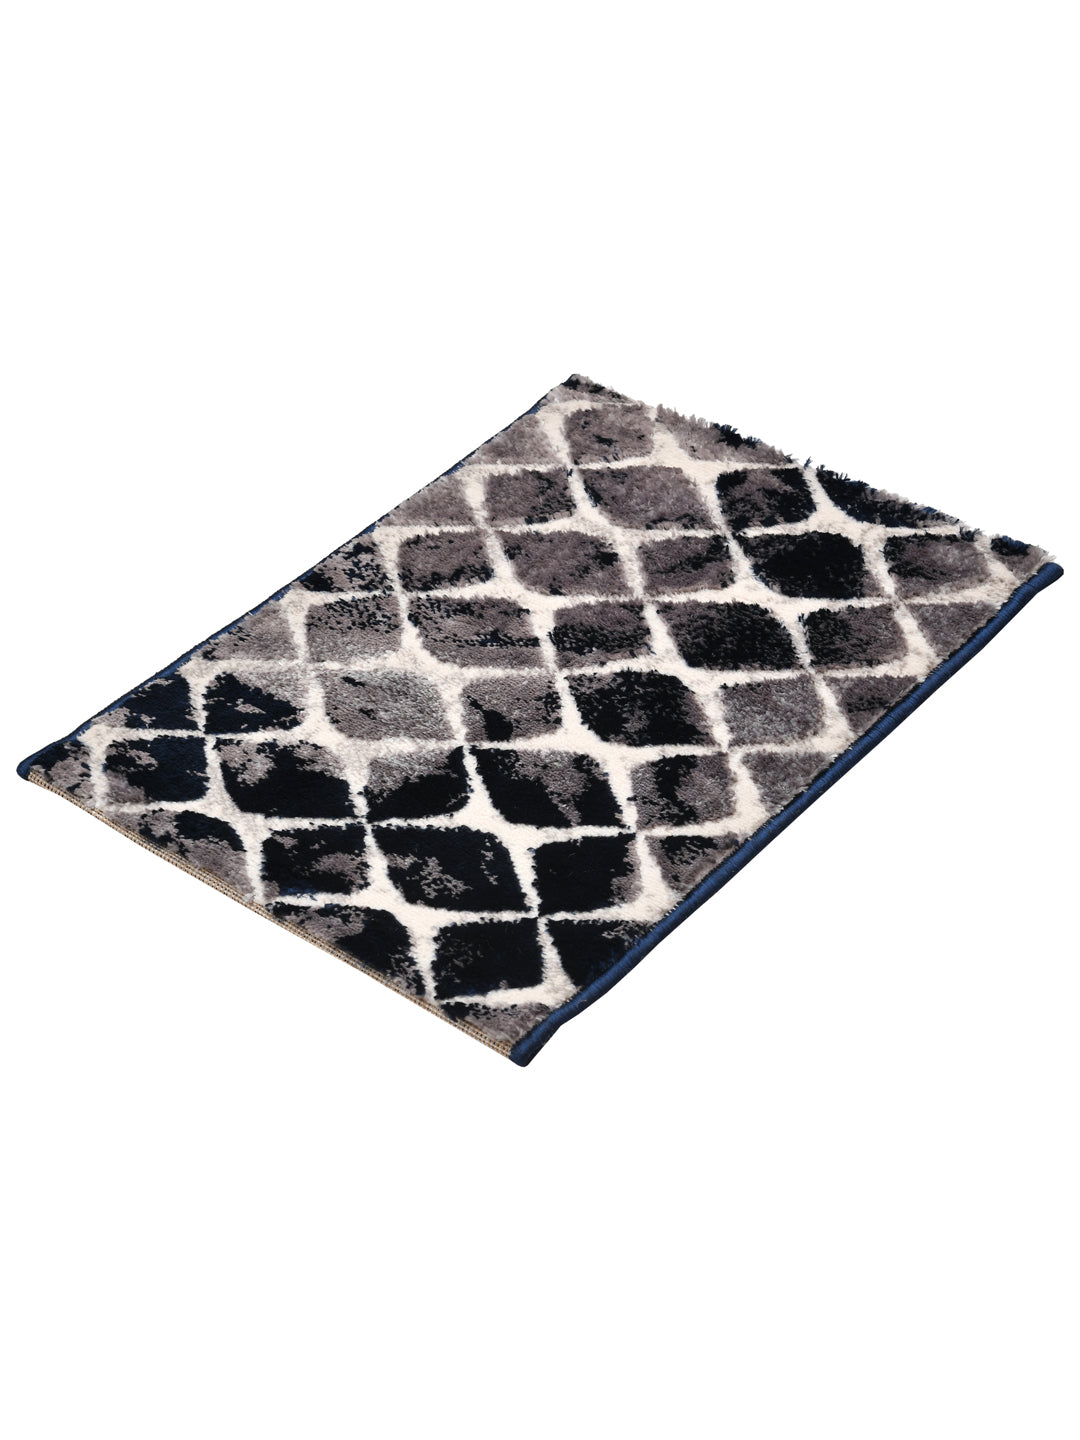 Doormat With Anti Skid Backing; 16x24 Inches; Grey Blue